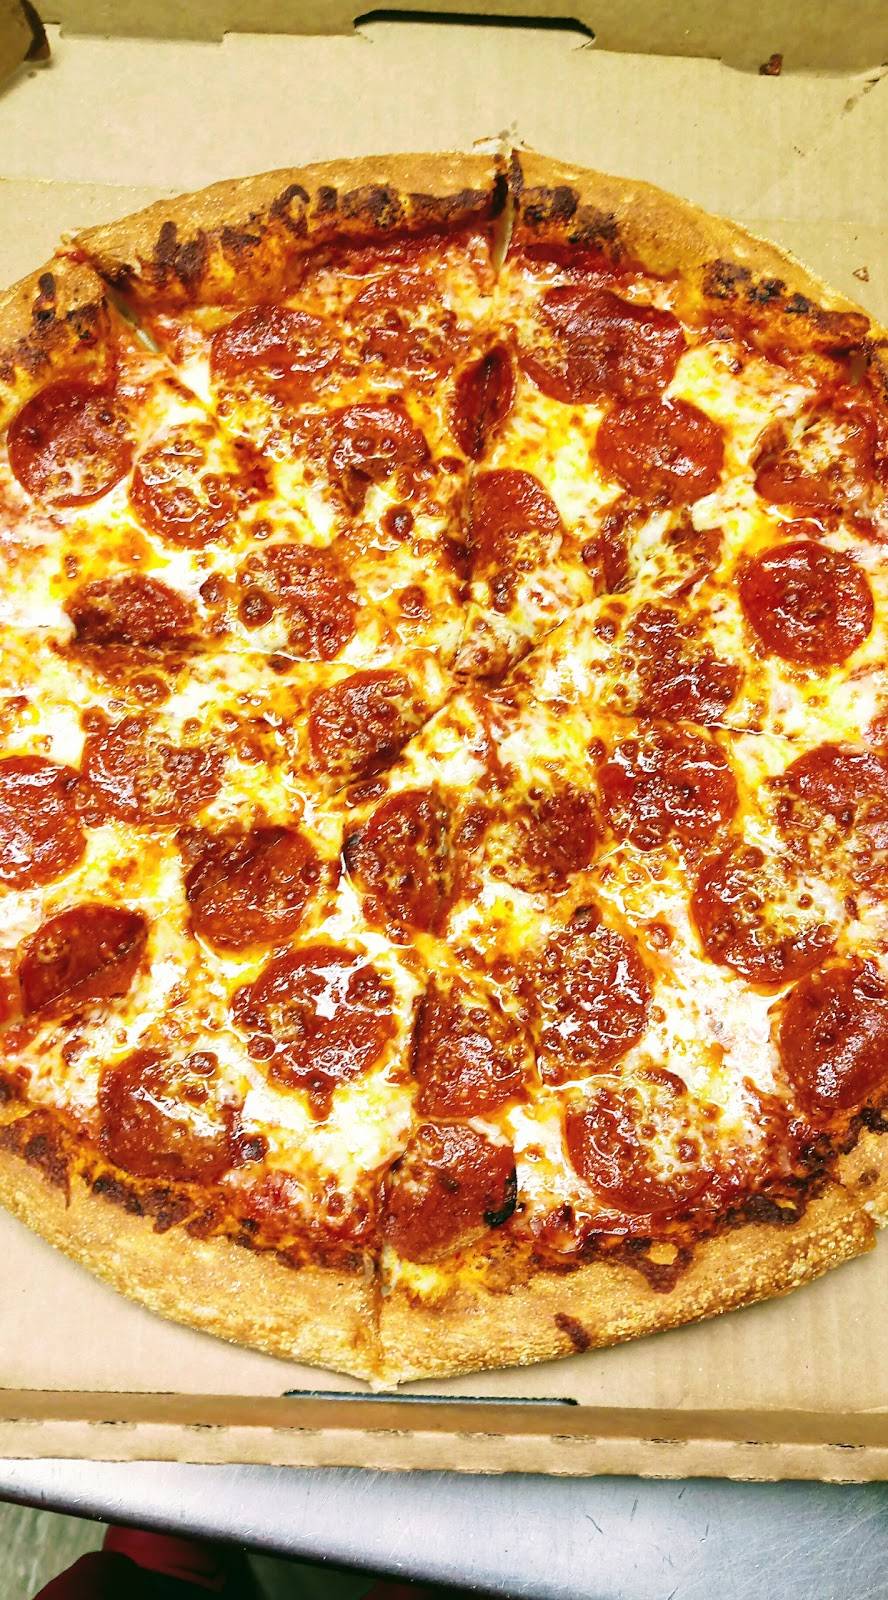 Pizza Bolis Gaithersburg | meal delivery | 20012 Goshen Rd, Montgomery Village, MD 20886, USA | 3019639600 OR +1 301-963-9600